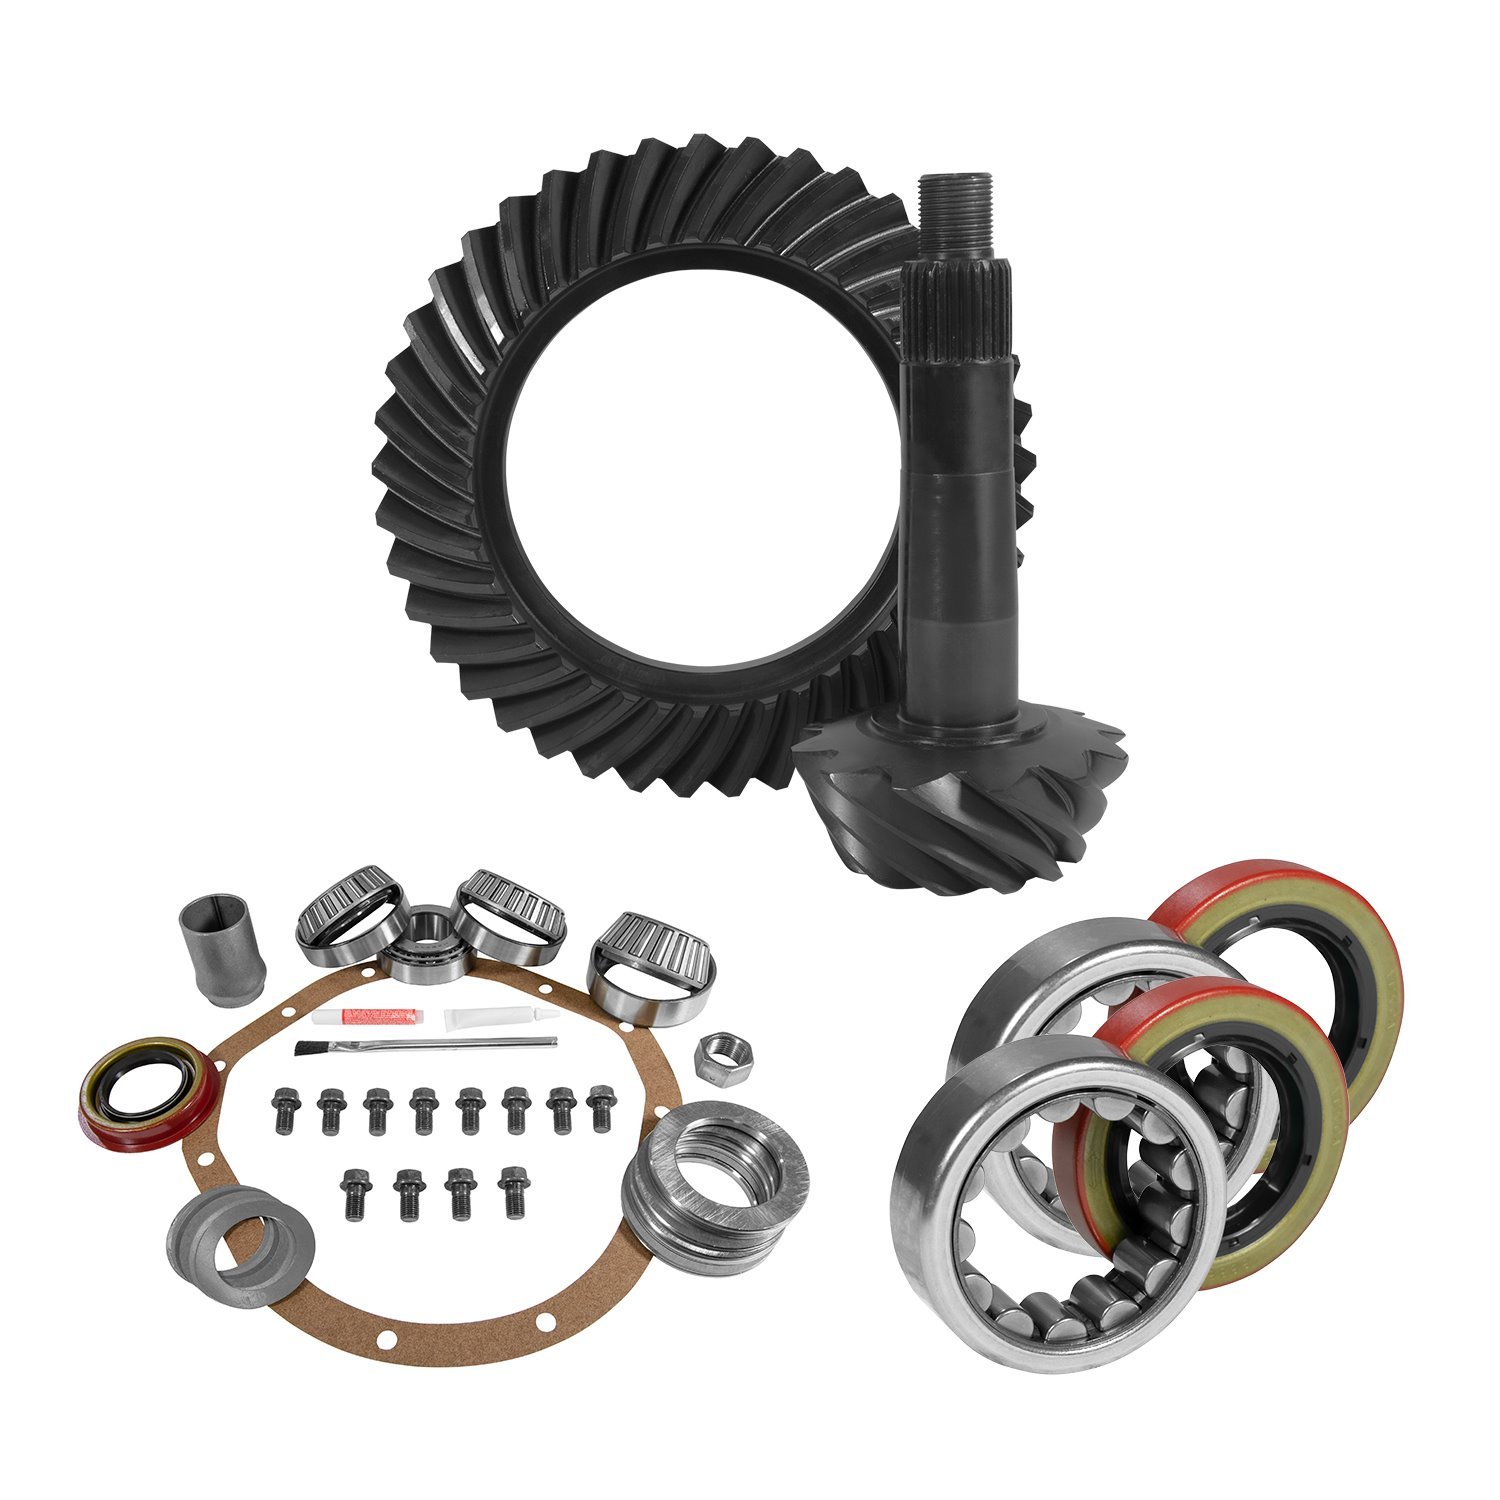 USA Standard 10680 8.875 in. GM 12T 3.08 Rear Ring & Pinion Install Kit, Axle Bearings & Seals